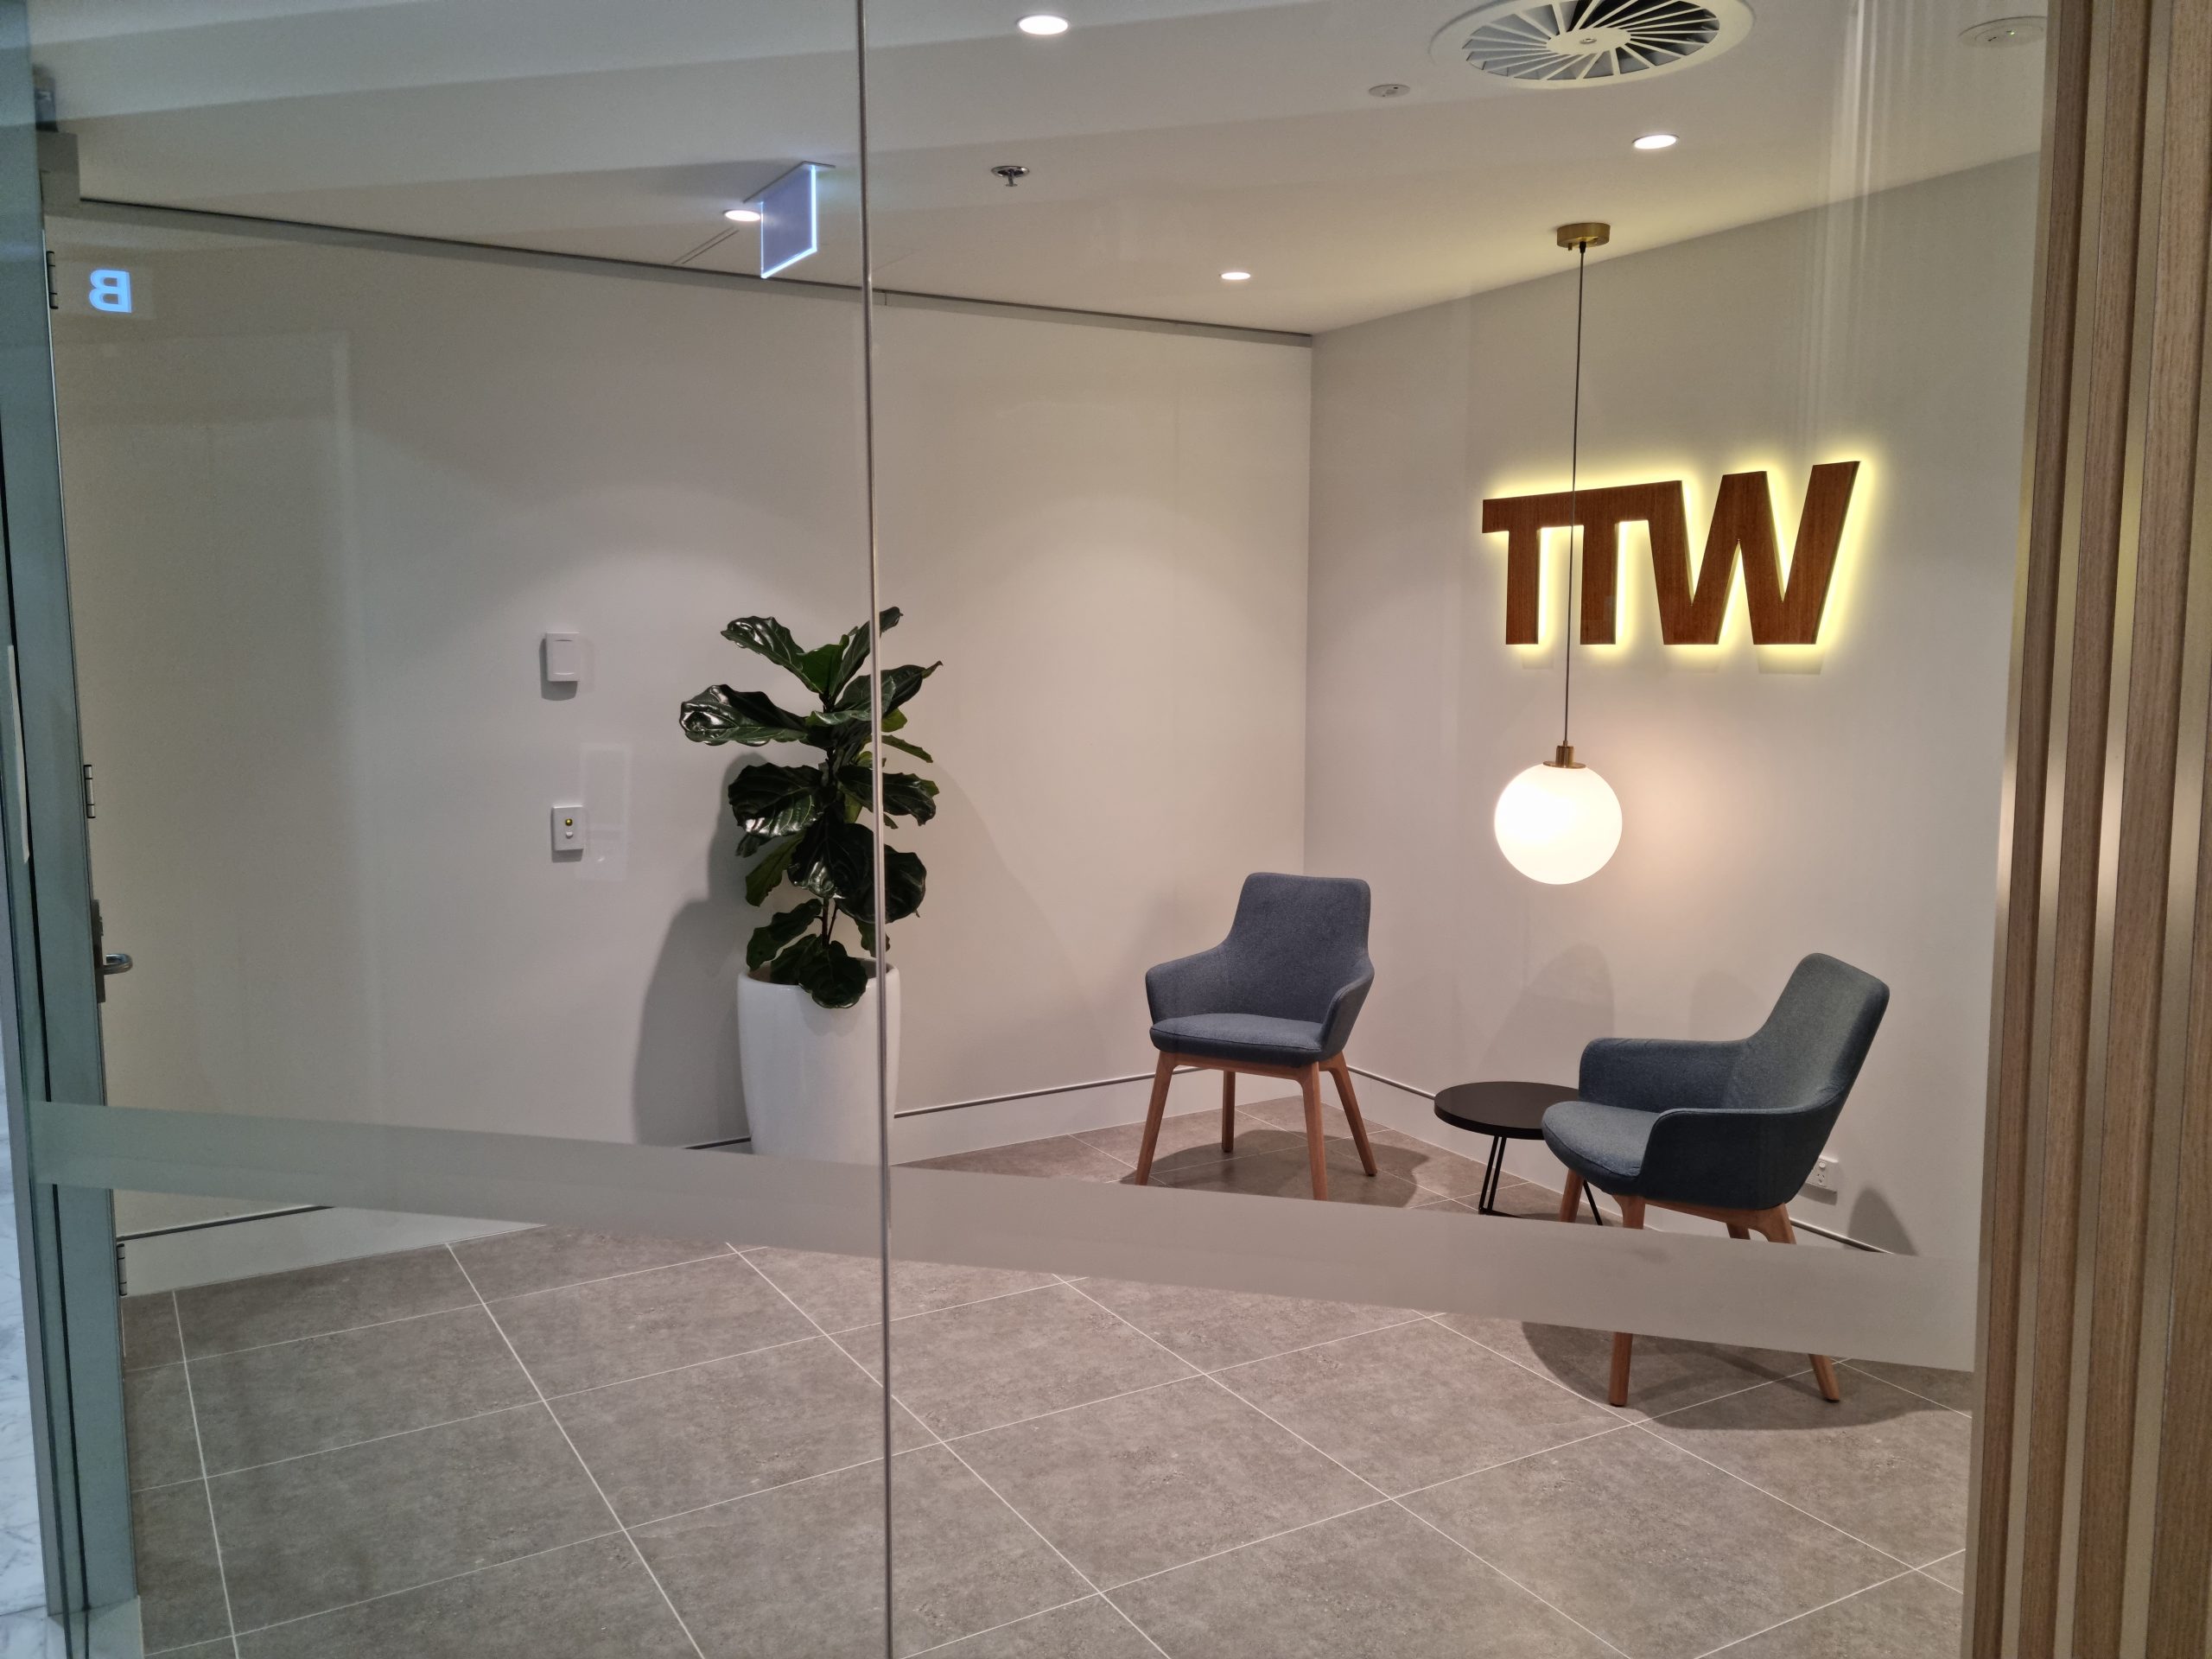 Welcome to Two24 Bunda St: Our New Office in Canberra